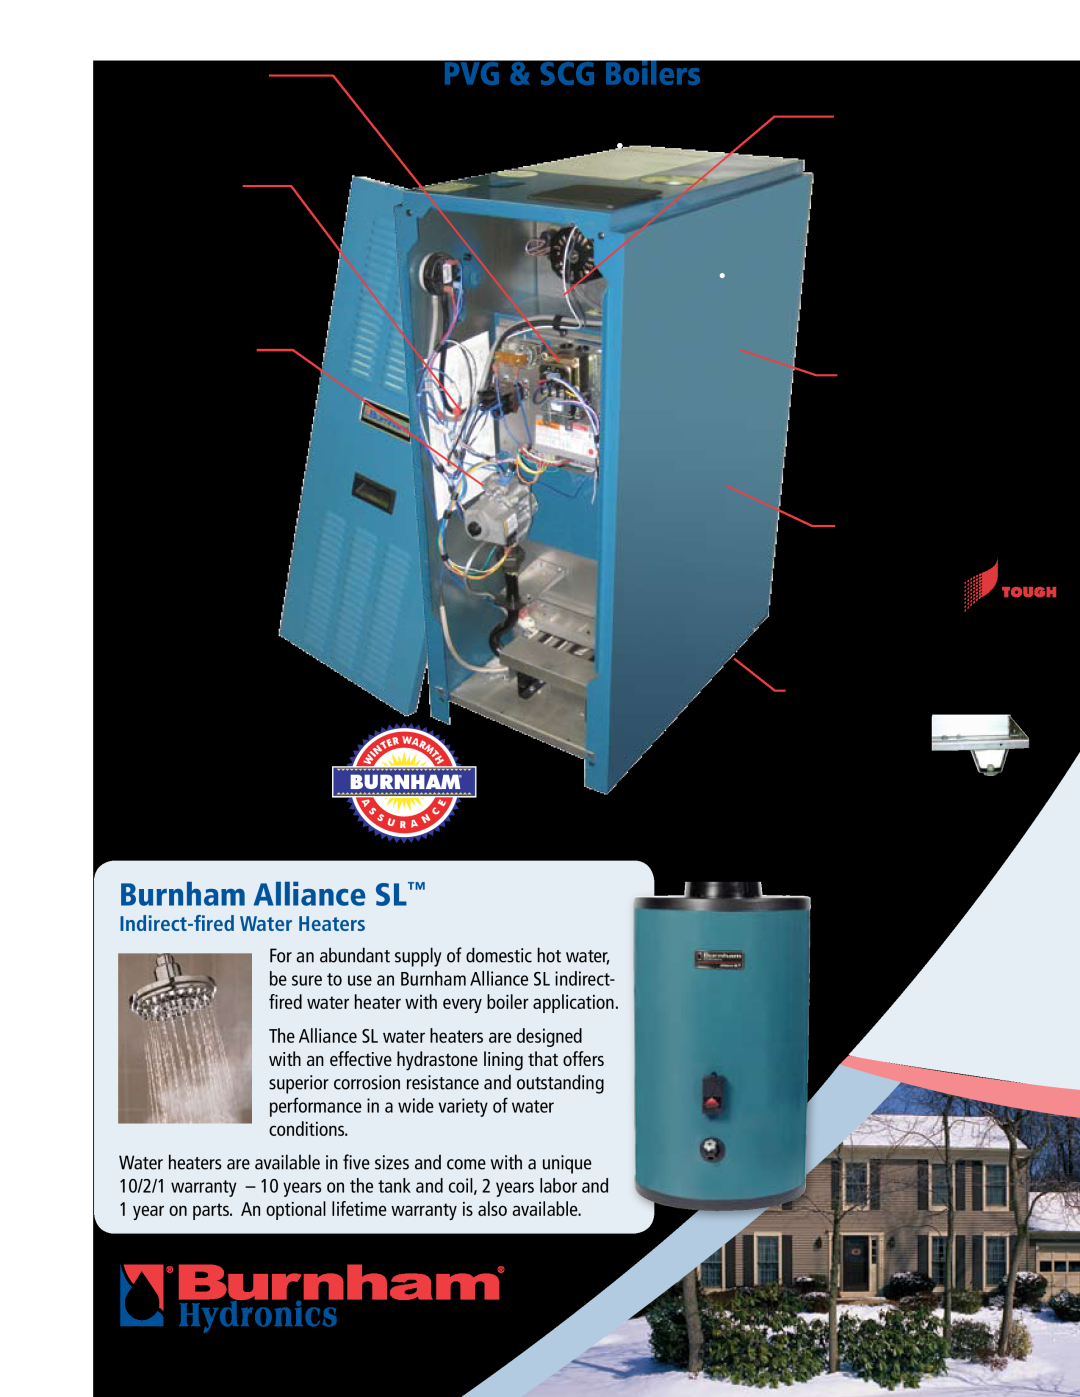 Burnham Burnham Alliance SL, Indirect-fired Water Heaters, PVG & SCG Boilers, Reliable Controls, Step Opening Gas Valve 